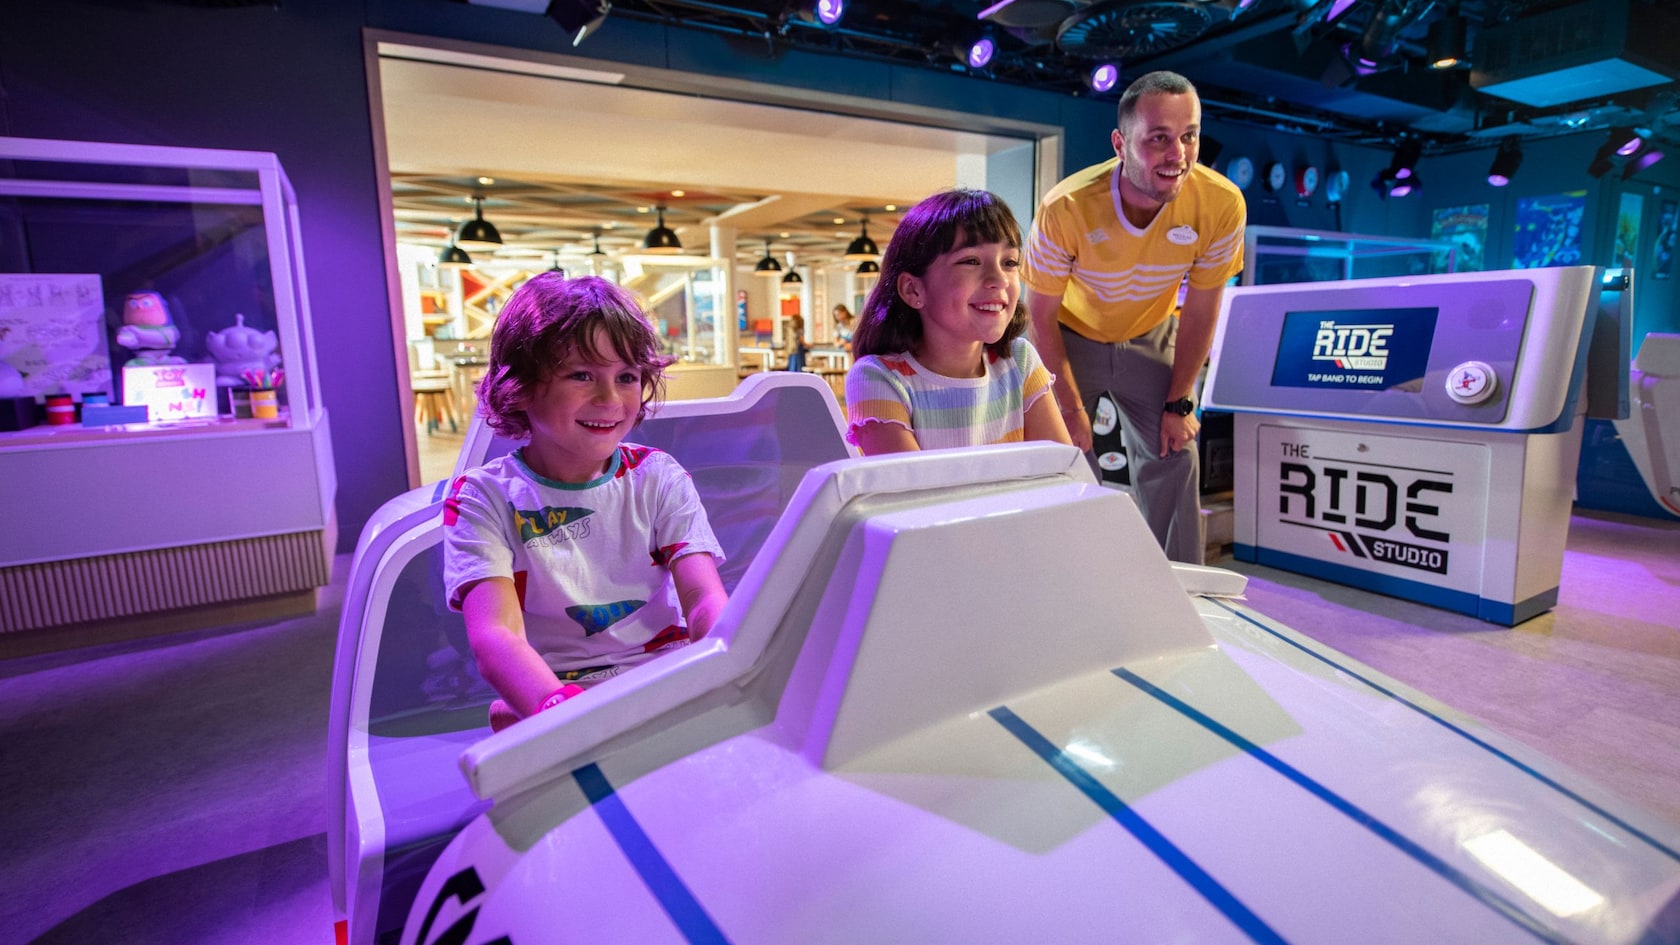 2 children sitting in a space ship simulator while a Disney youth counselor looks on